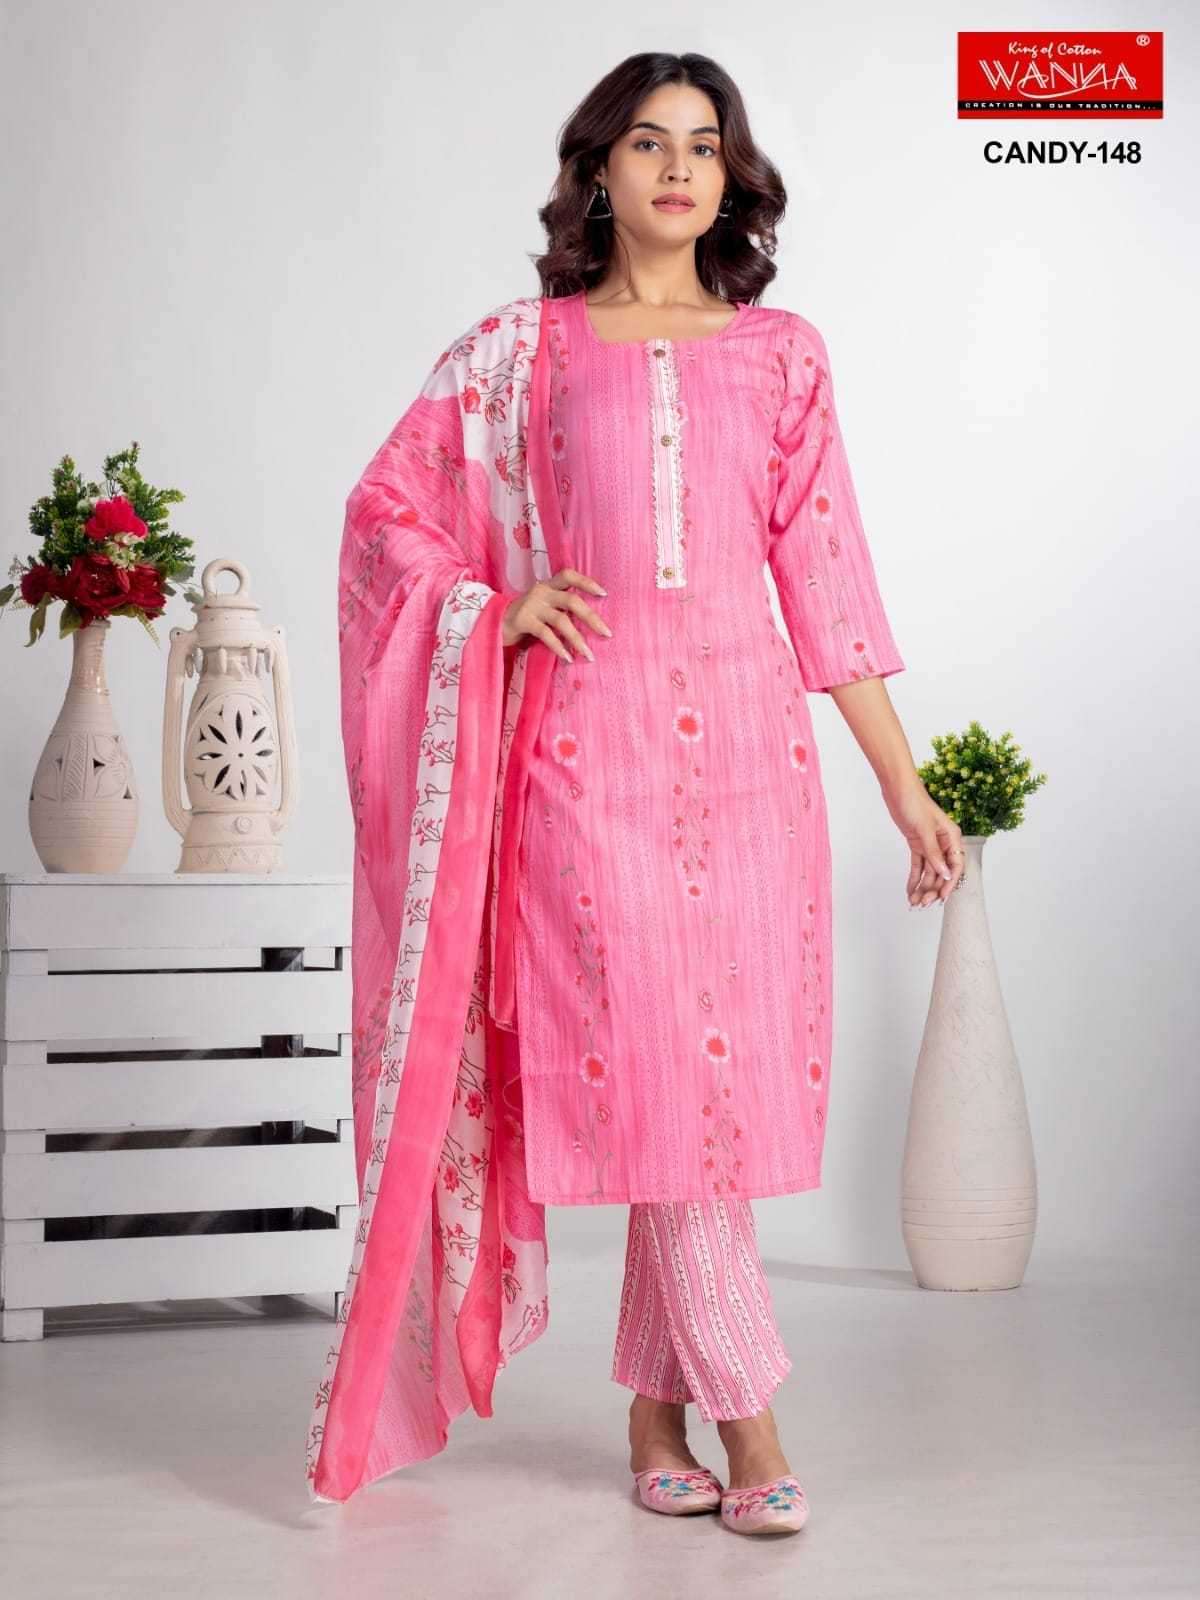 wanna candy Two to two tone soft readymade suit 